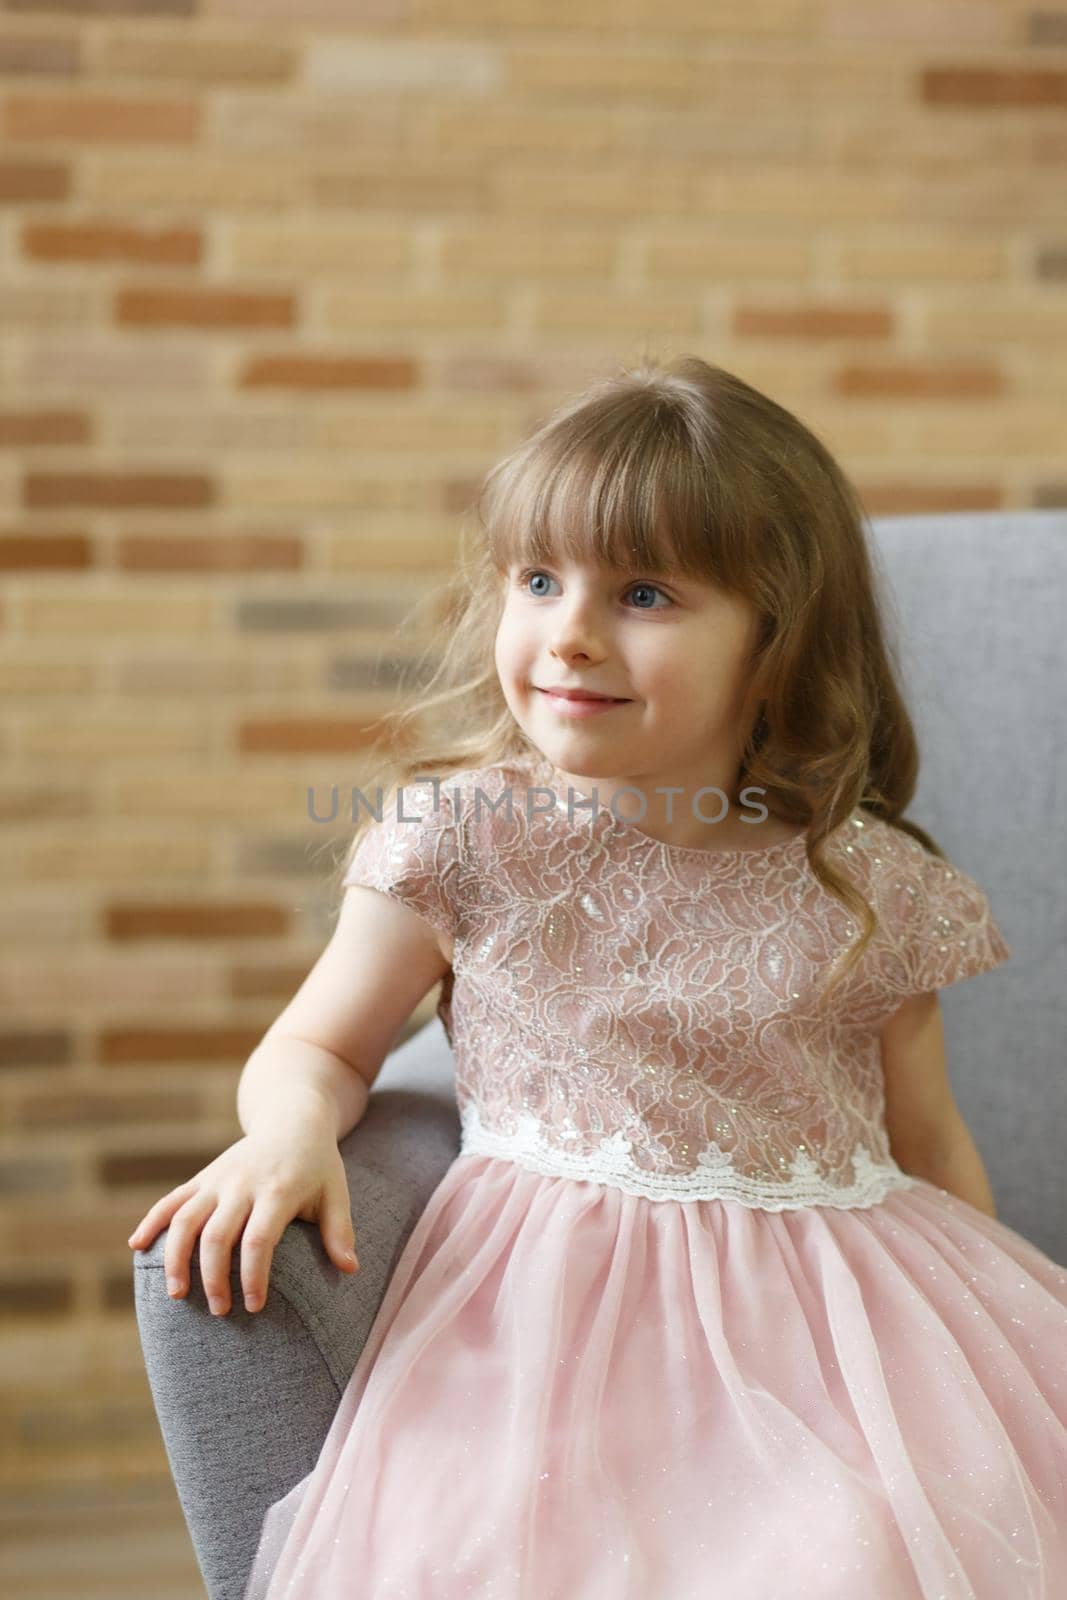 Adorable little girl looking at camera at home by BY-_-BY